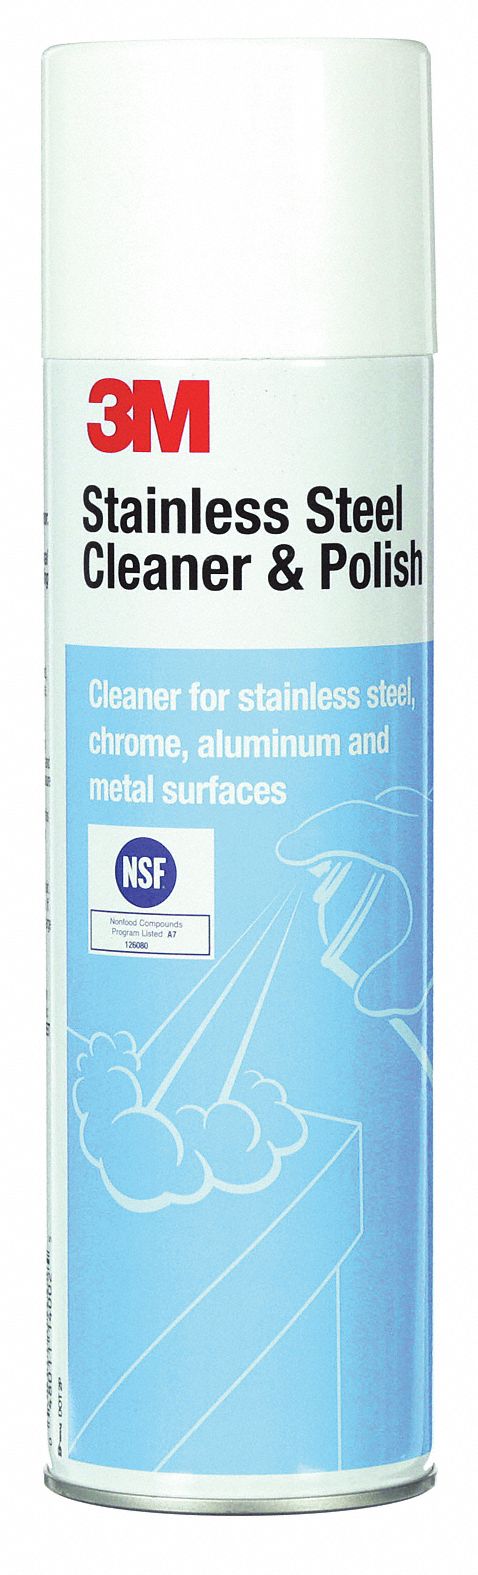 3M™ Stainless Steel Cleaner and Polish, 21 oz Aerosol - Mass Technologies -  3M Authorised Distributor